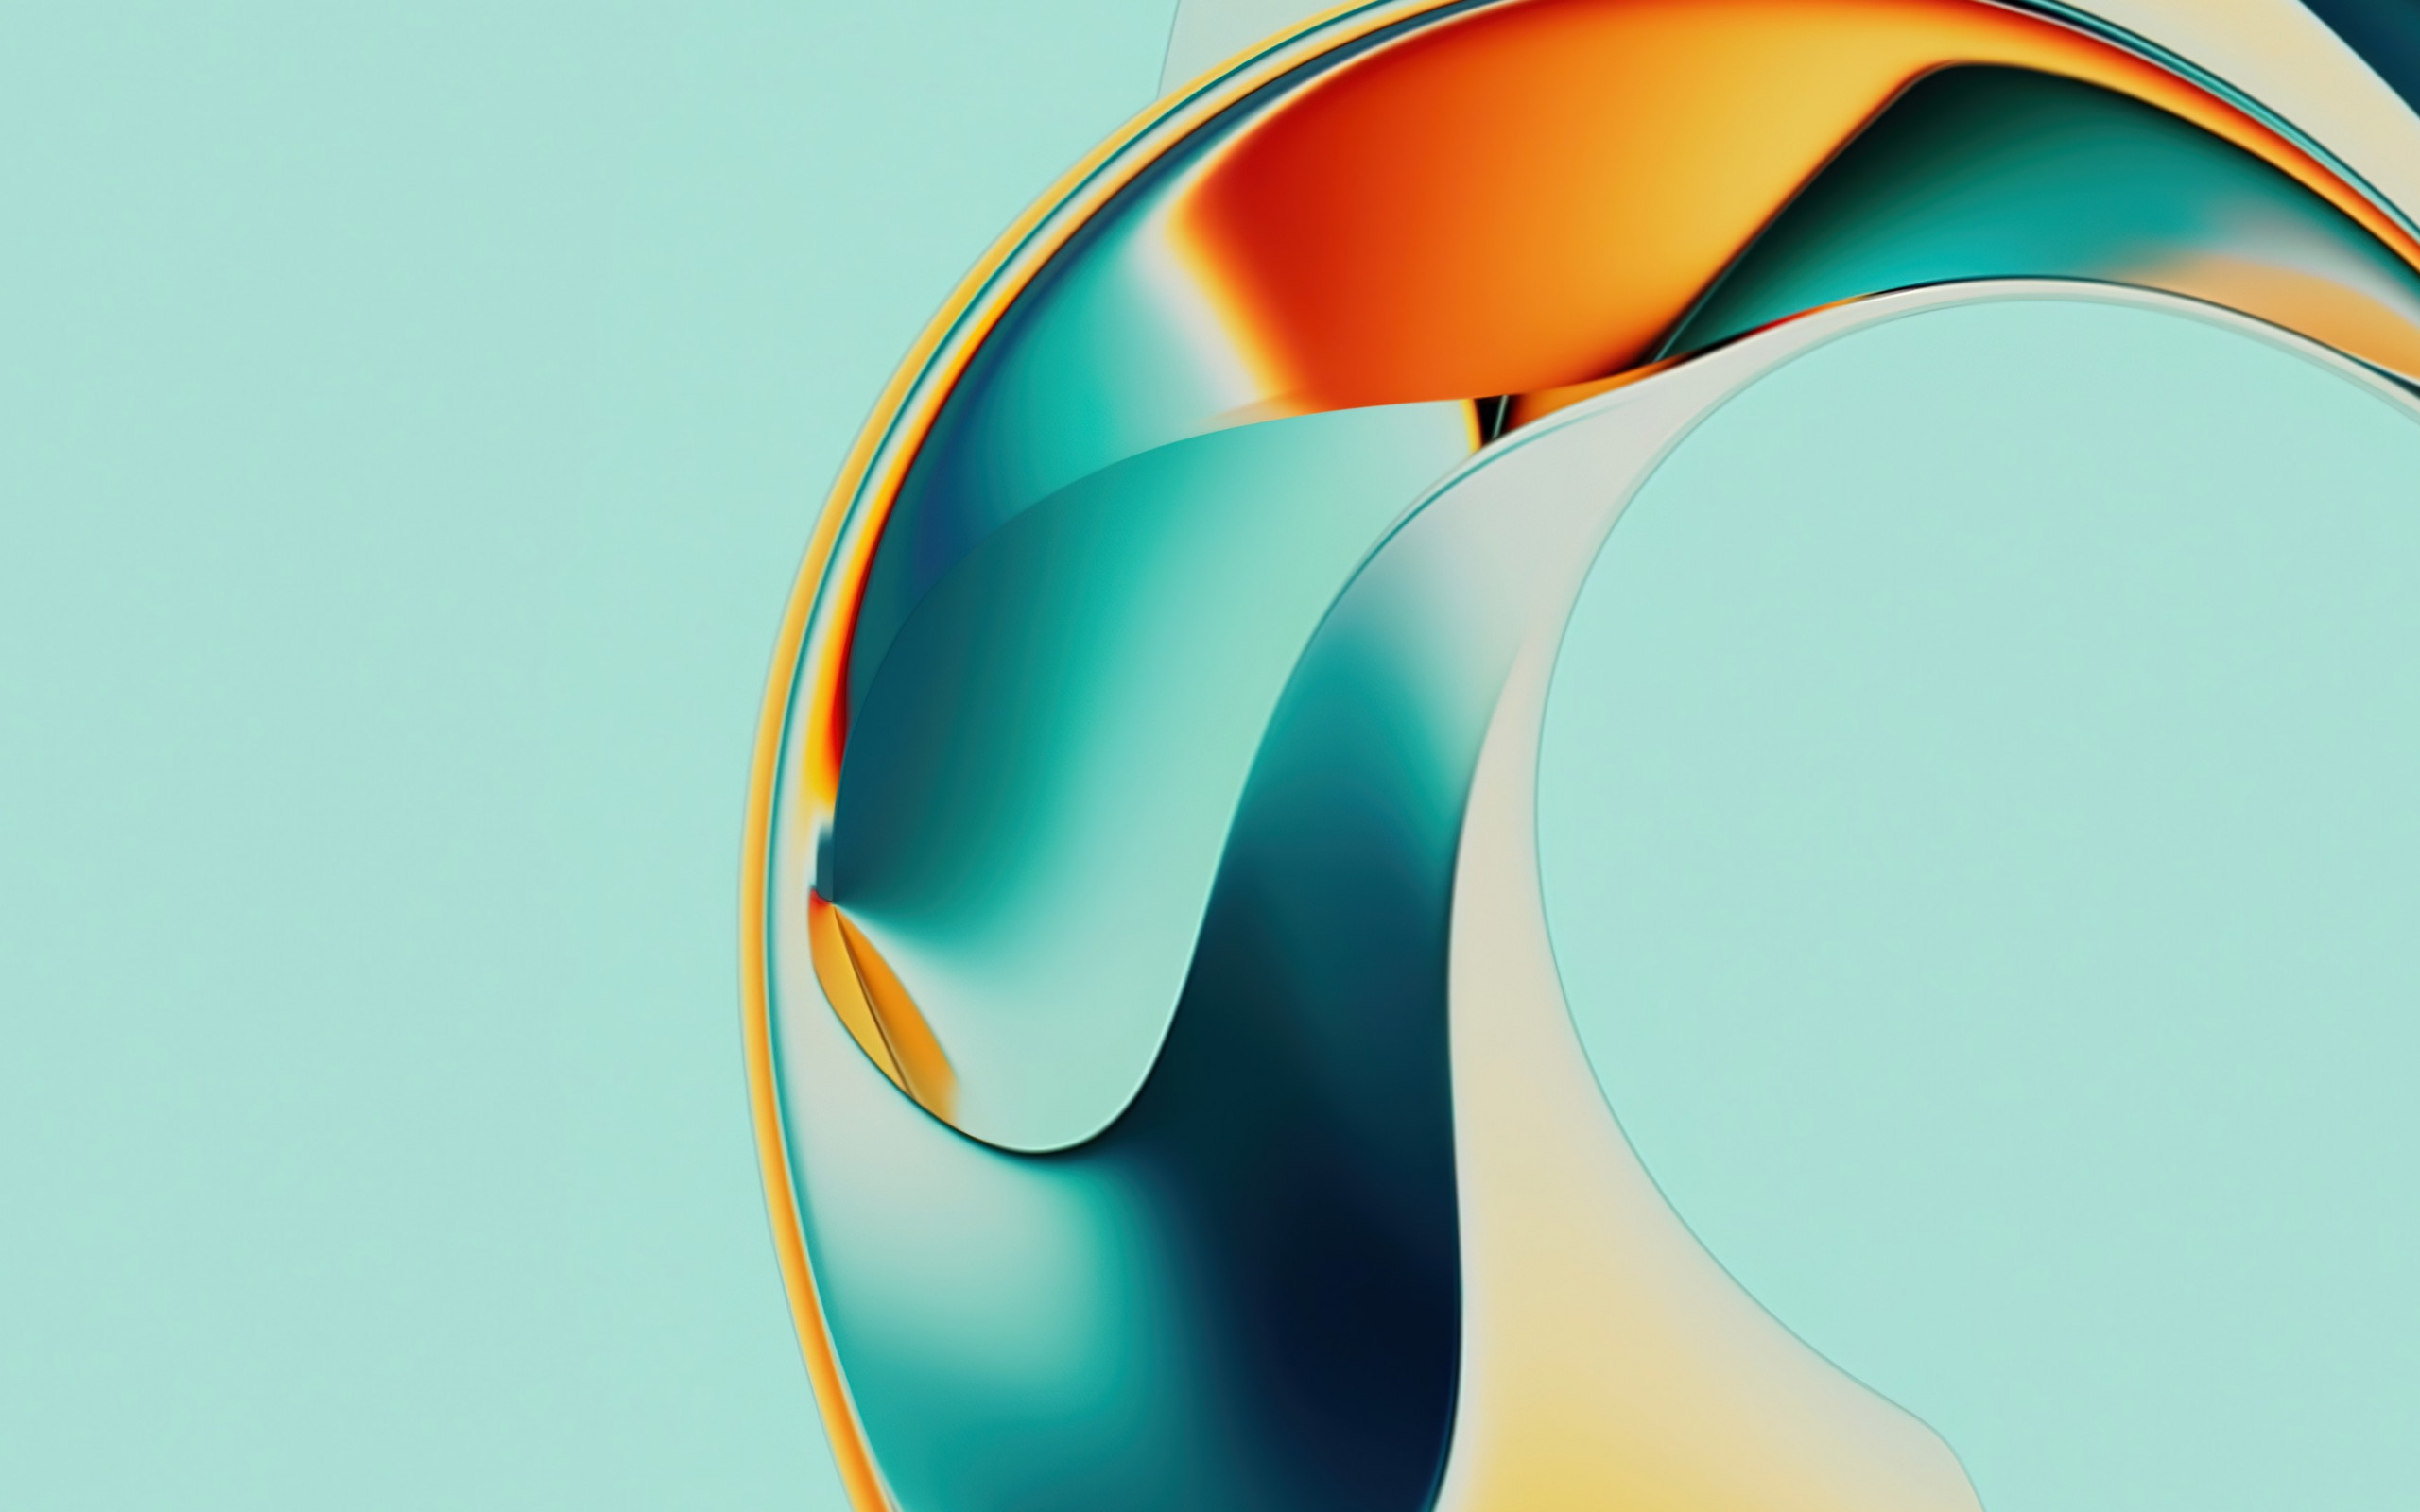 Abstract design in P60 Pro wallpaper 2560x1600